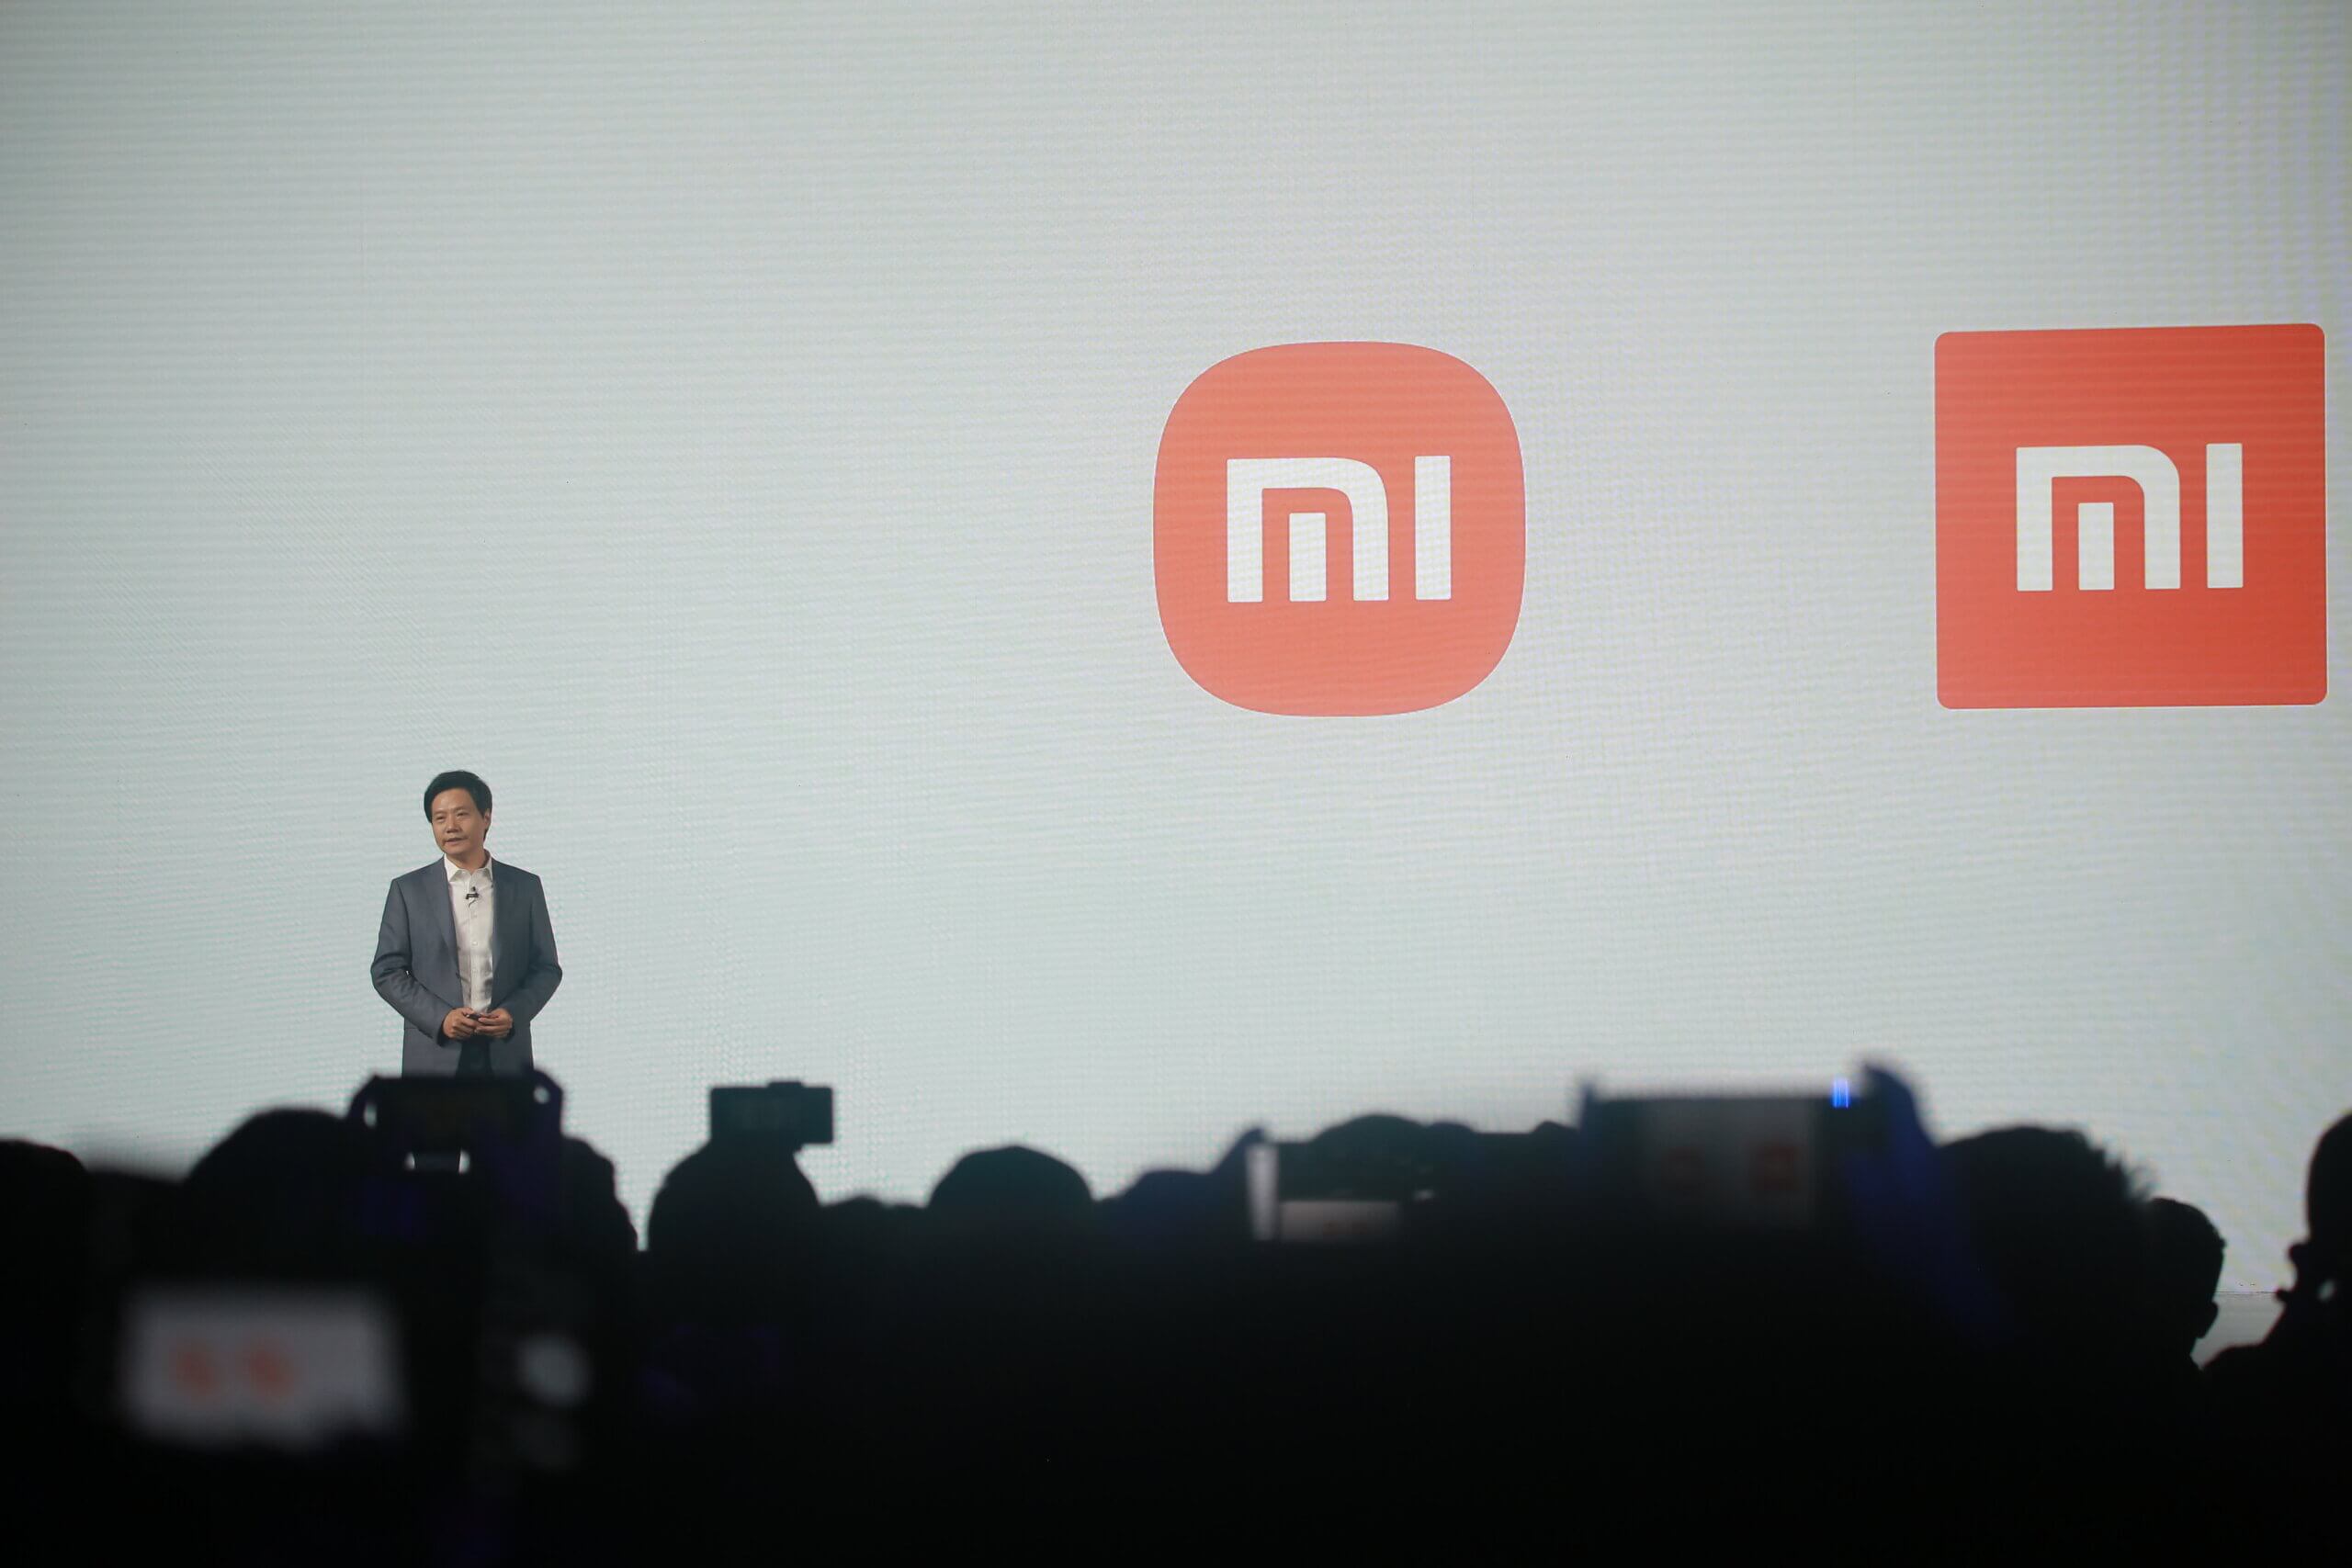 Xiaomi formally registers its electrical car business and says it has 300 team